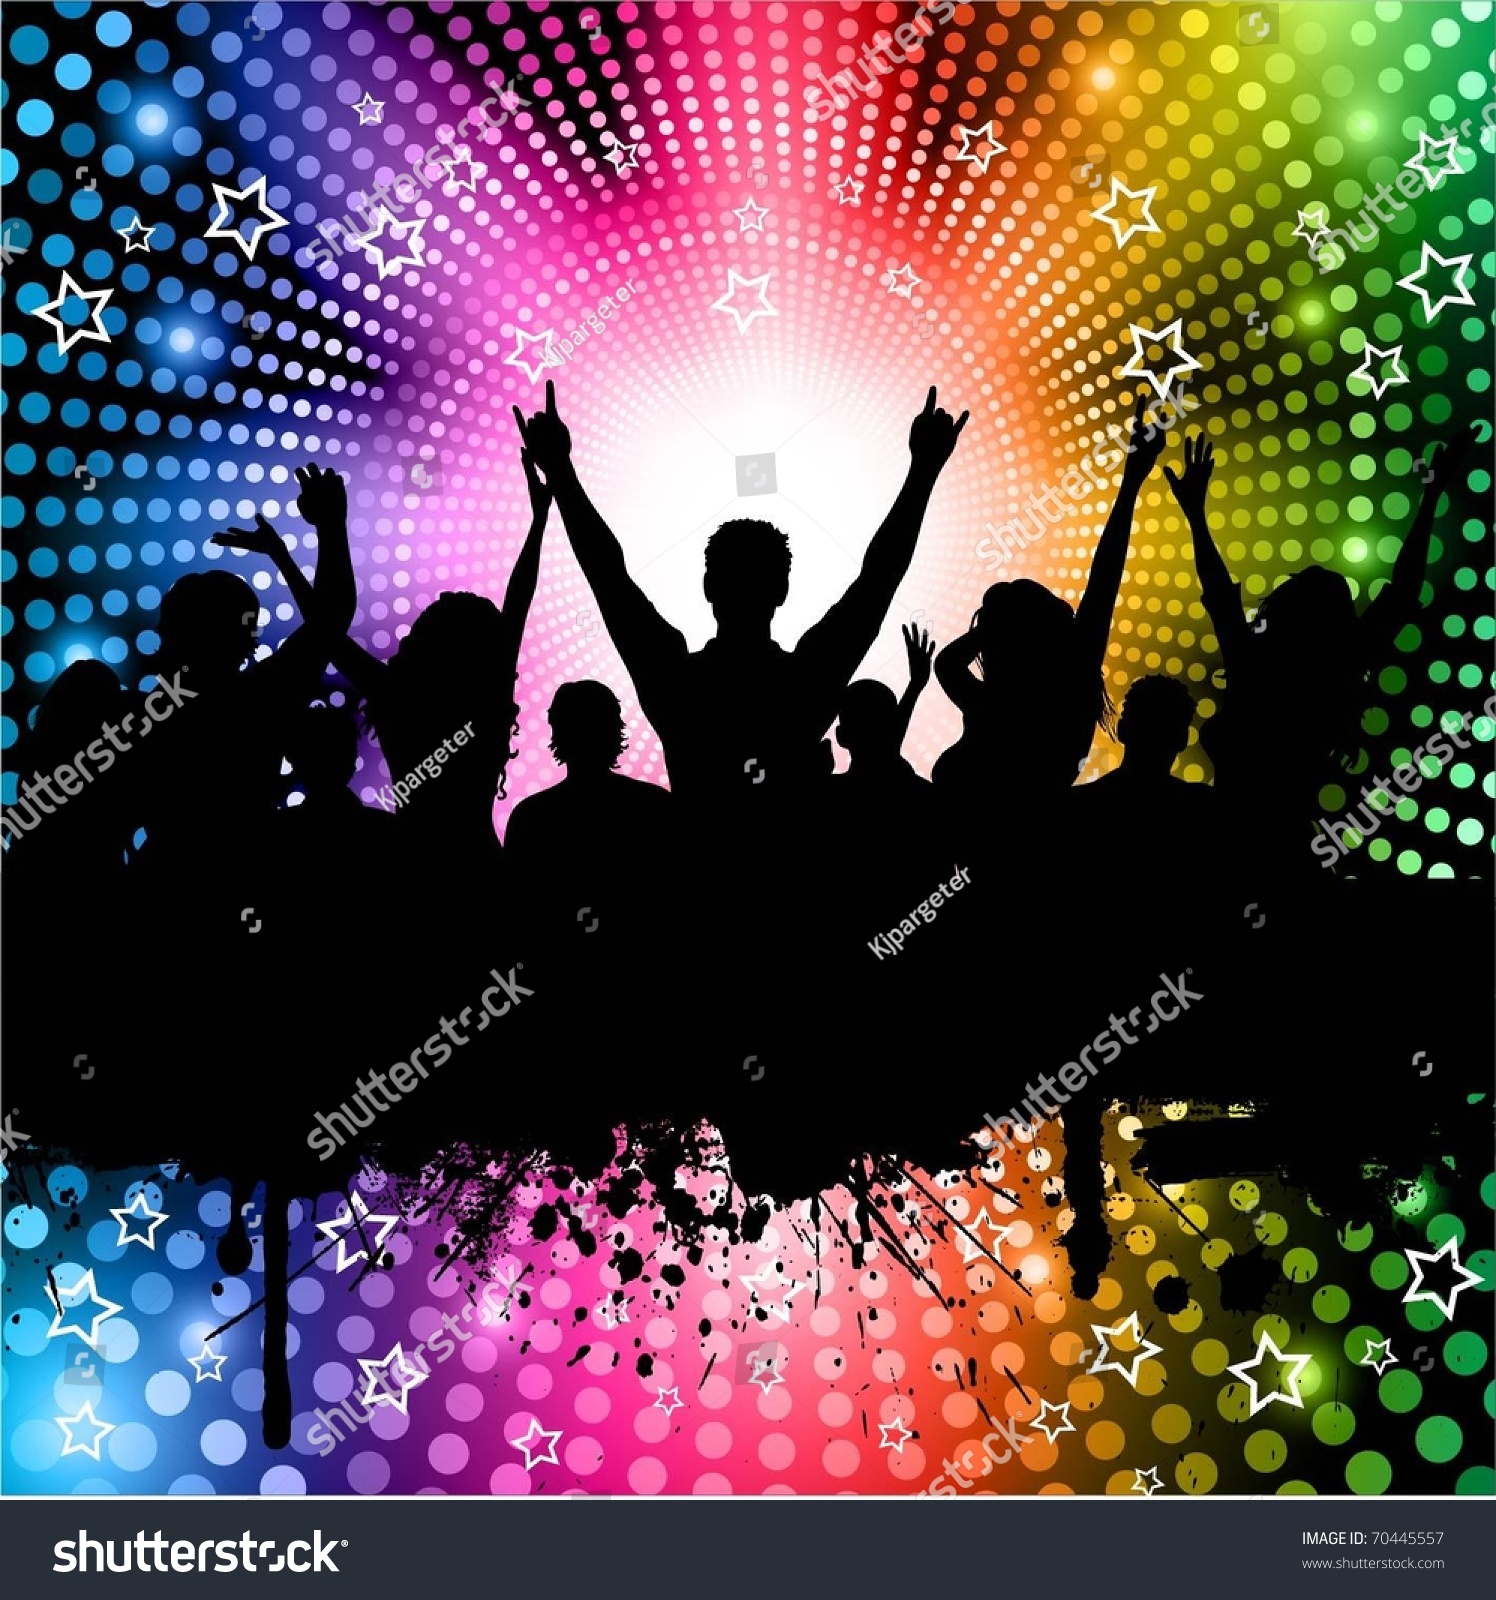 Party People On Disco Lights Background Stock Vector 70445557 ...